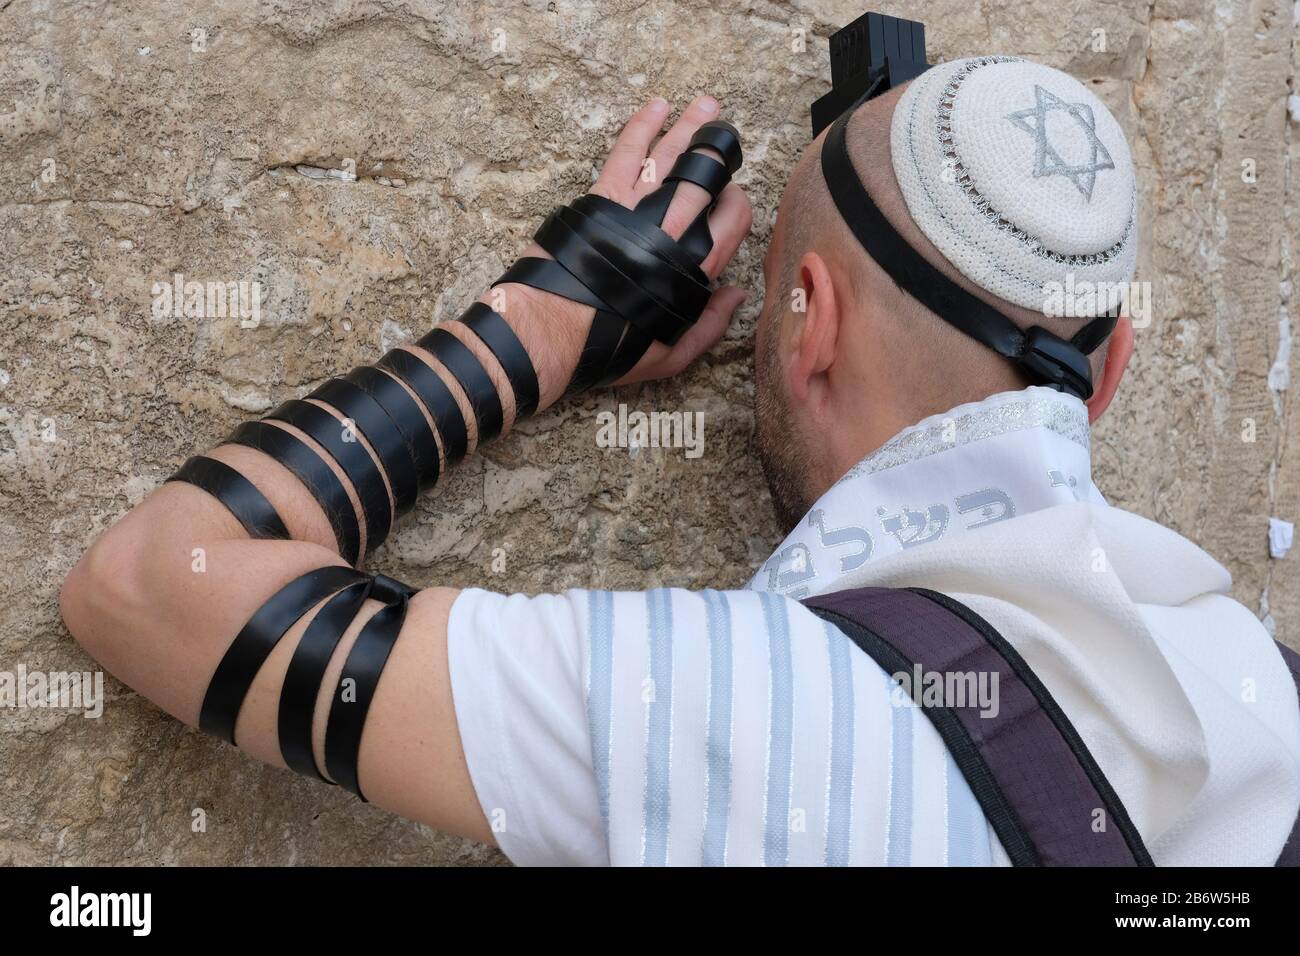 Orthodox Jewish man with tefillin and tallit, sitting alone and